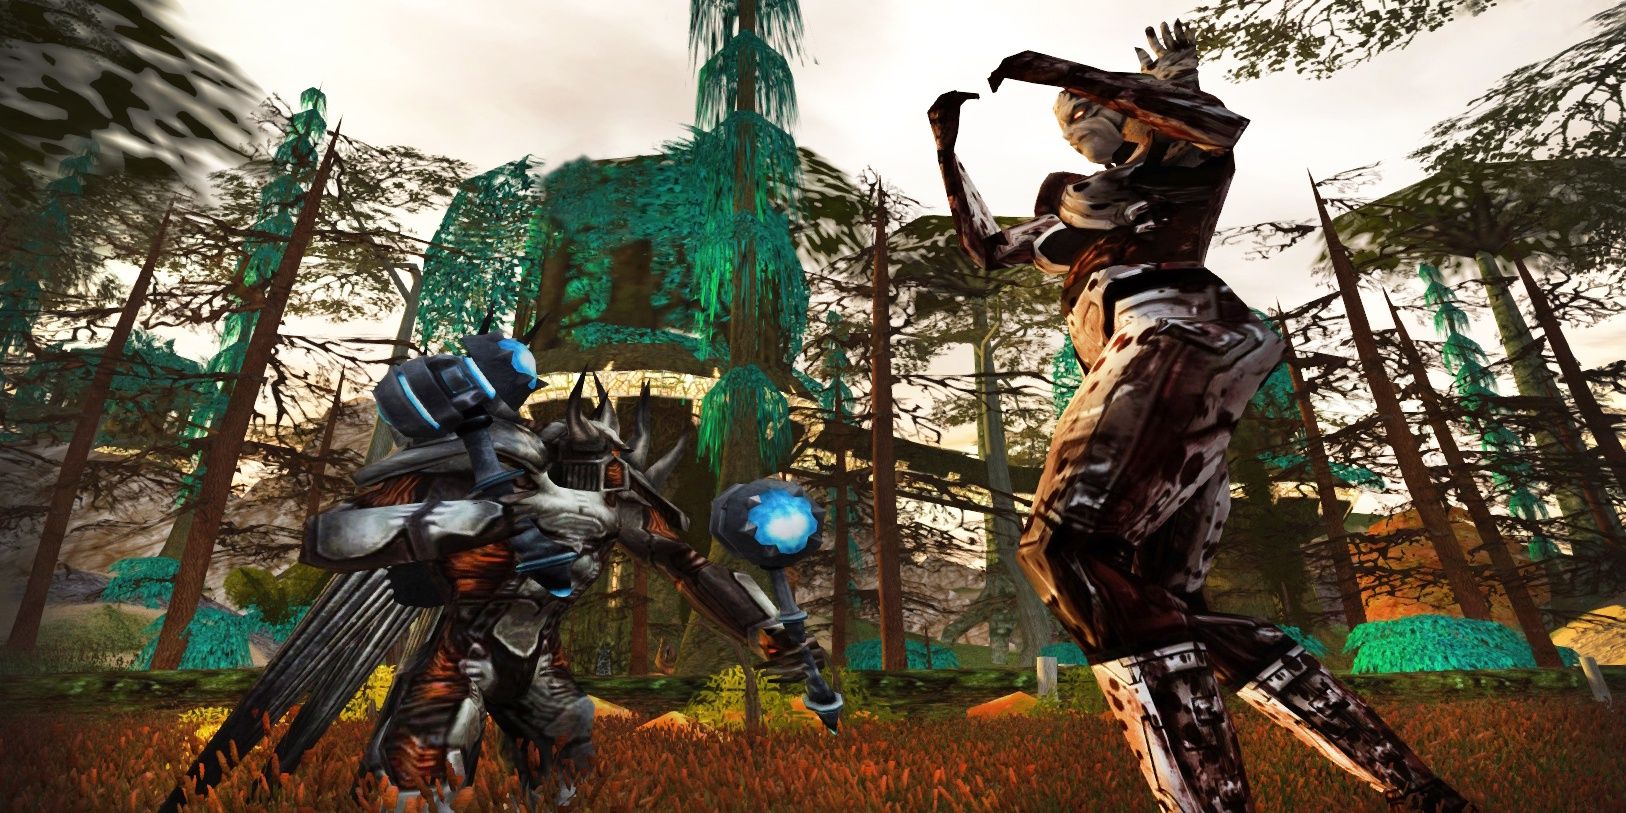 Anarchy Online featuring two characters fighting in a forest